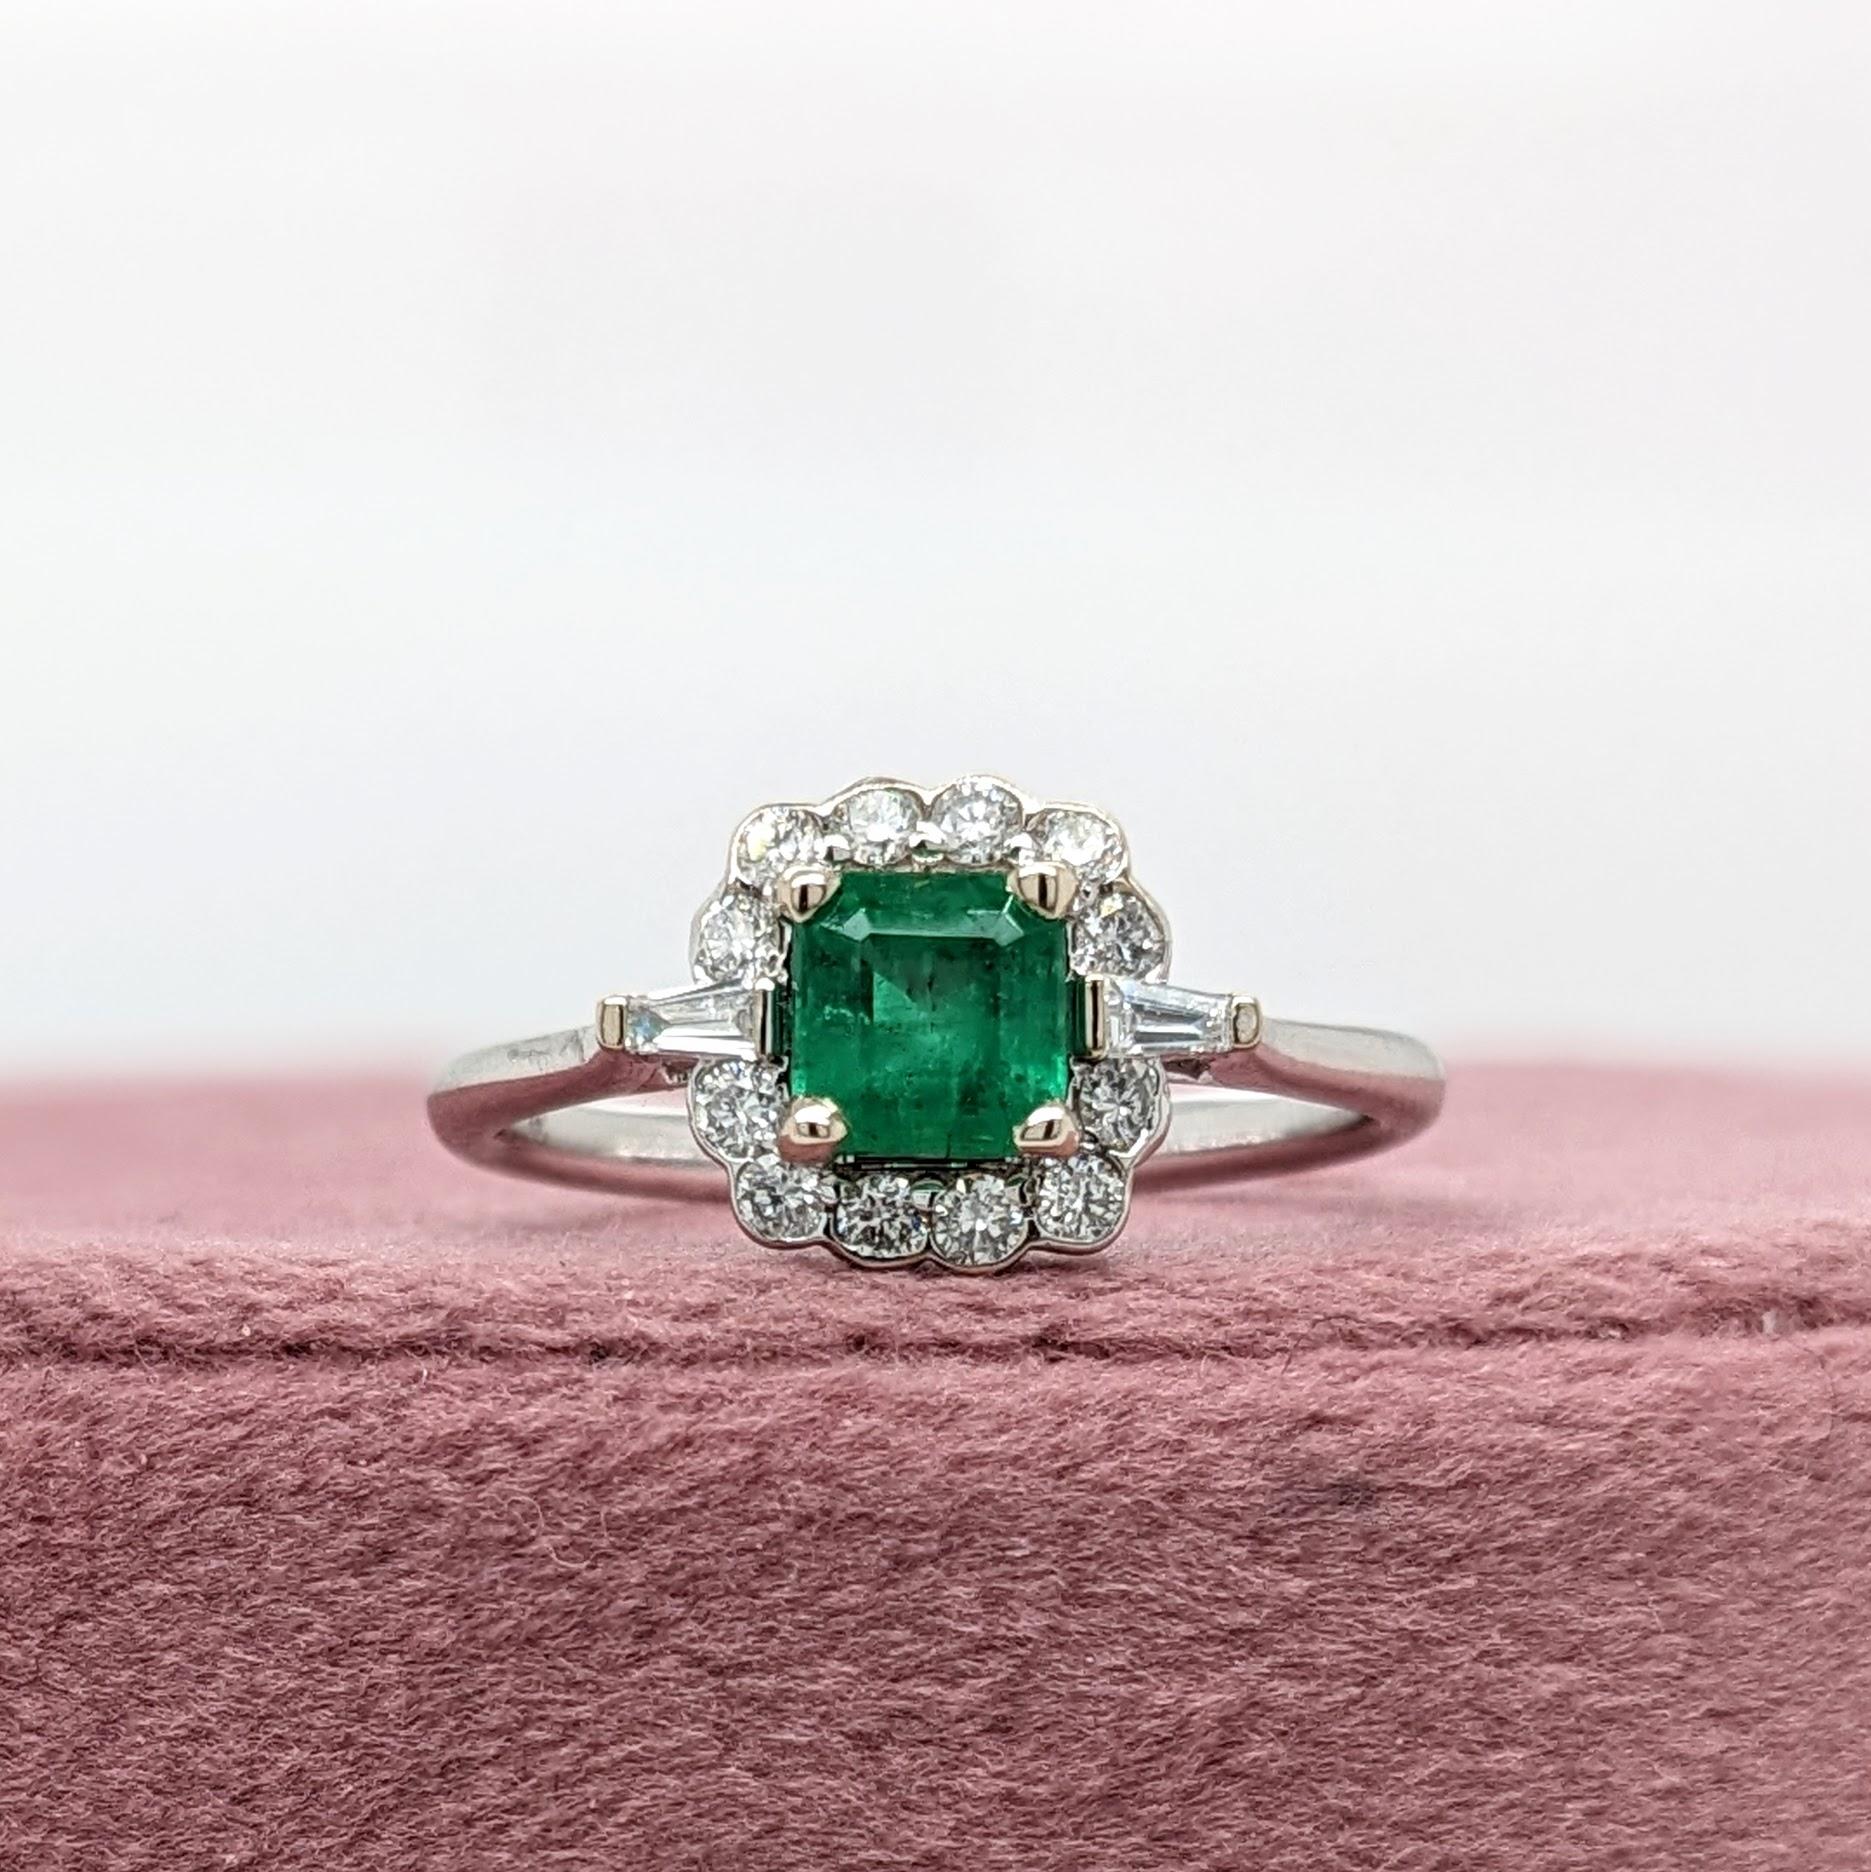 This lovely balanced ring design flaunts a gorgeous Zambian Emerald with an incredible grass green hue. It's a great size for a daily accessory and looks stunning seated in a scalloped halo of diamonds, with two tapered baguette diamonds that create